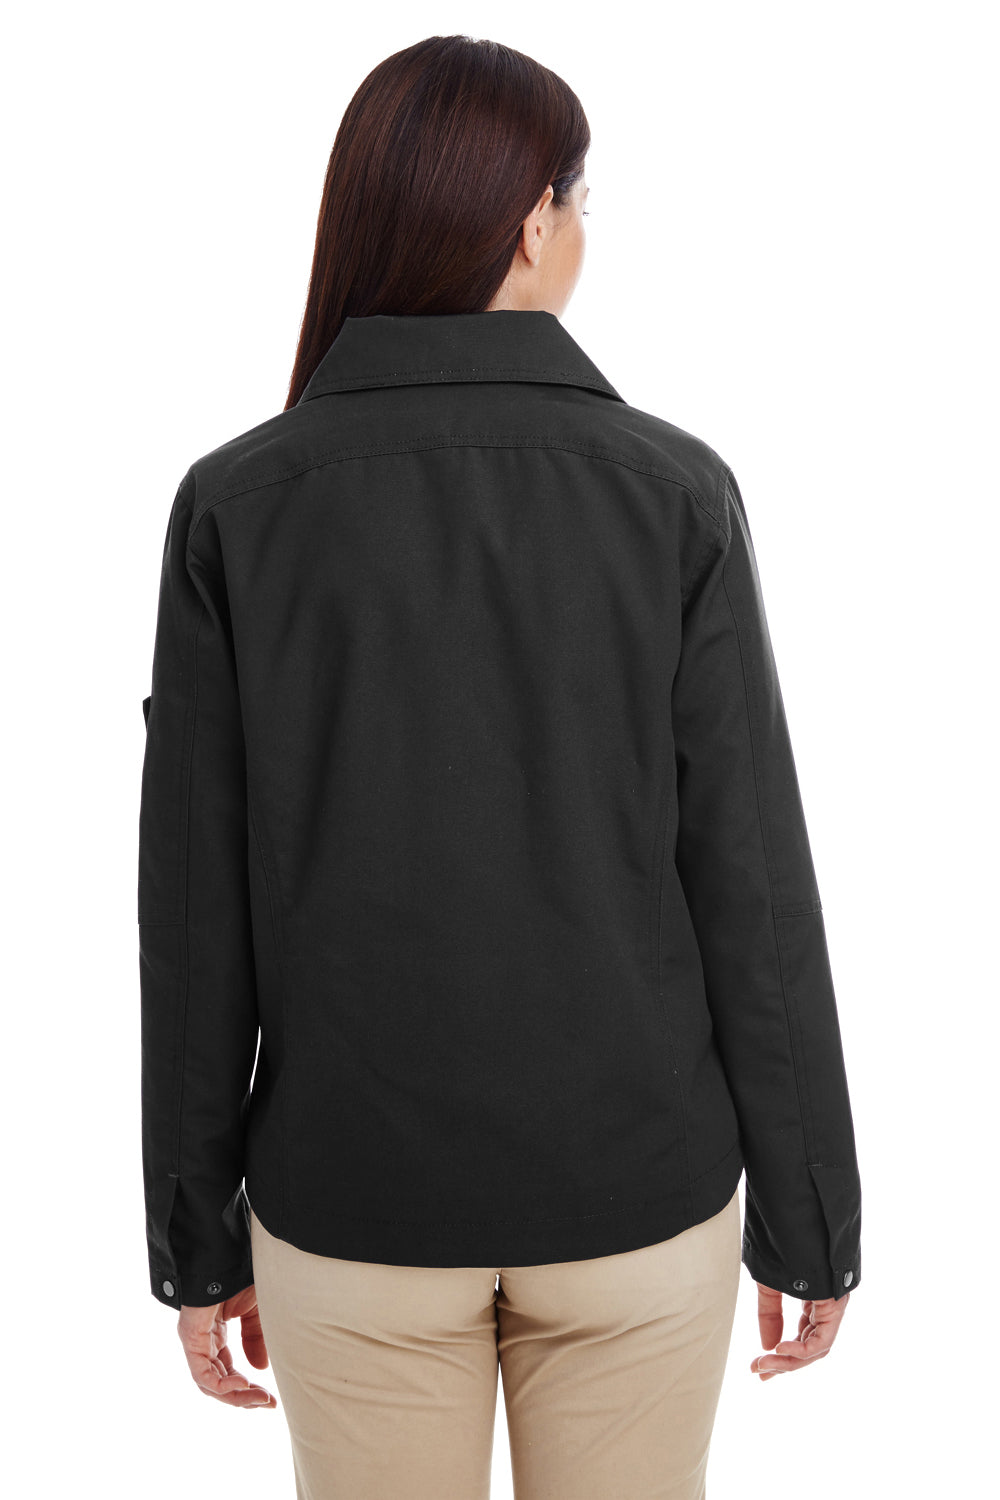 Harriton M705W Womens Auxiliary Water Resistant Canvas Full Zip Jacket Black Back